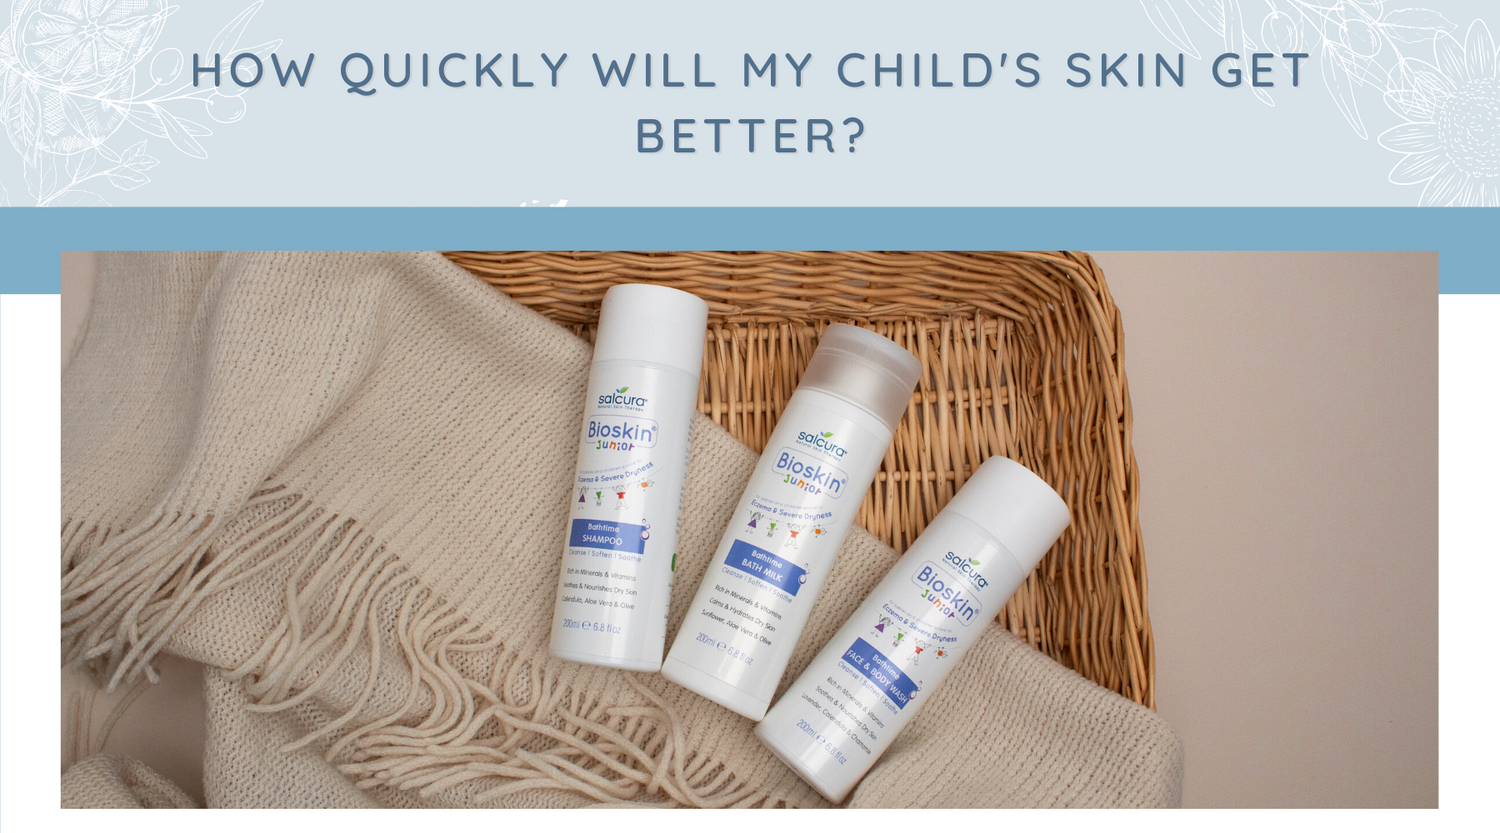 How quickly will my child's skin get better?